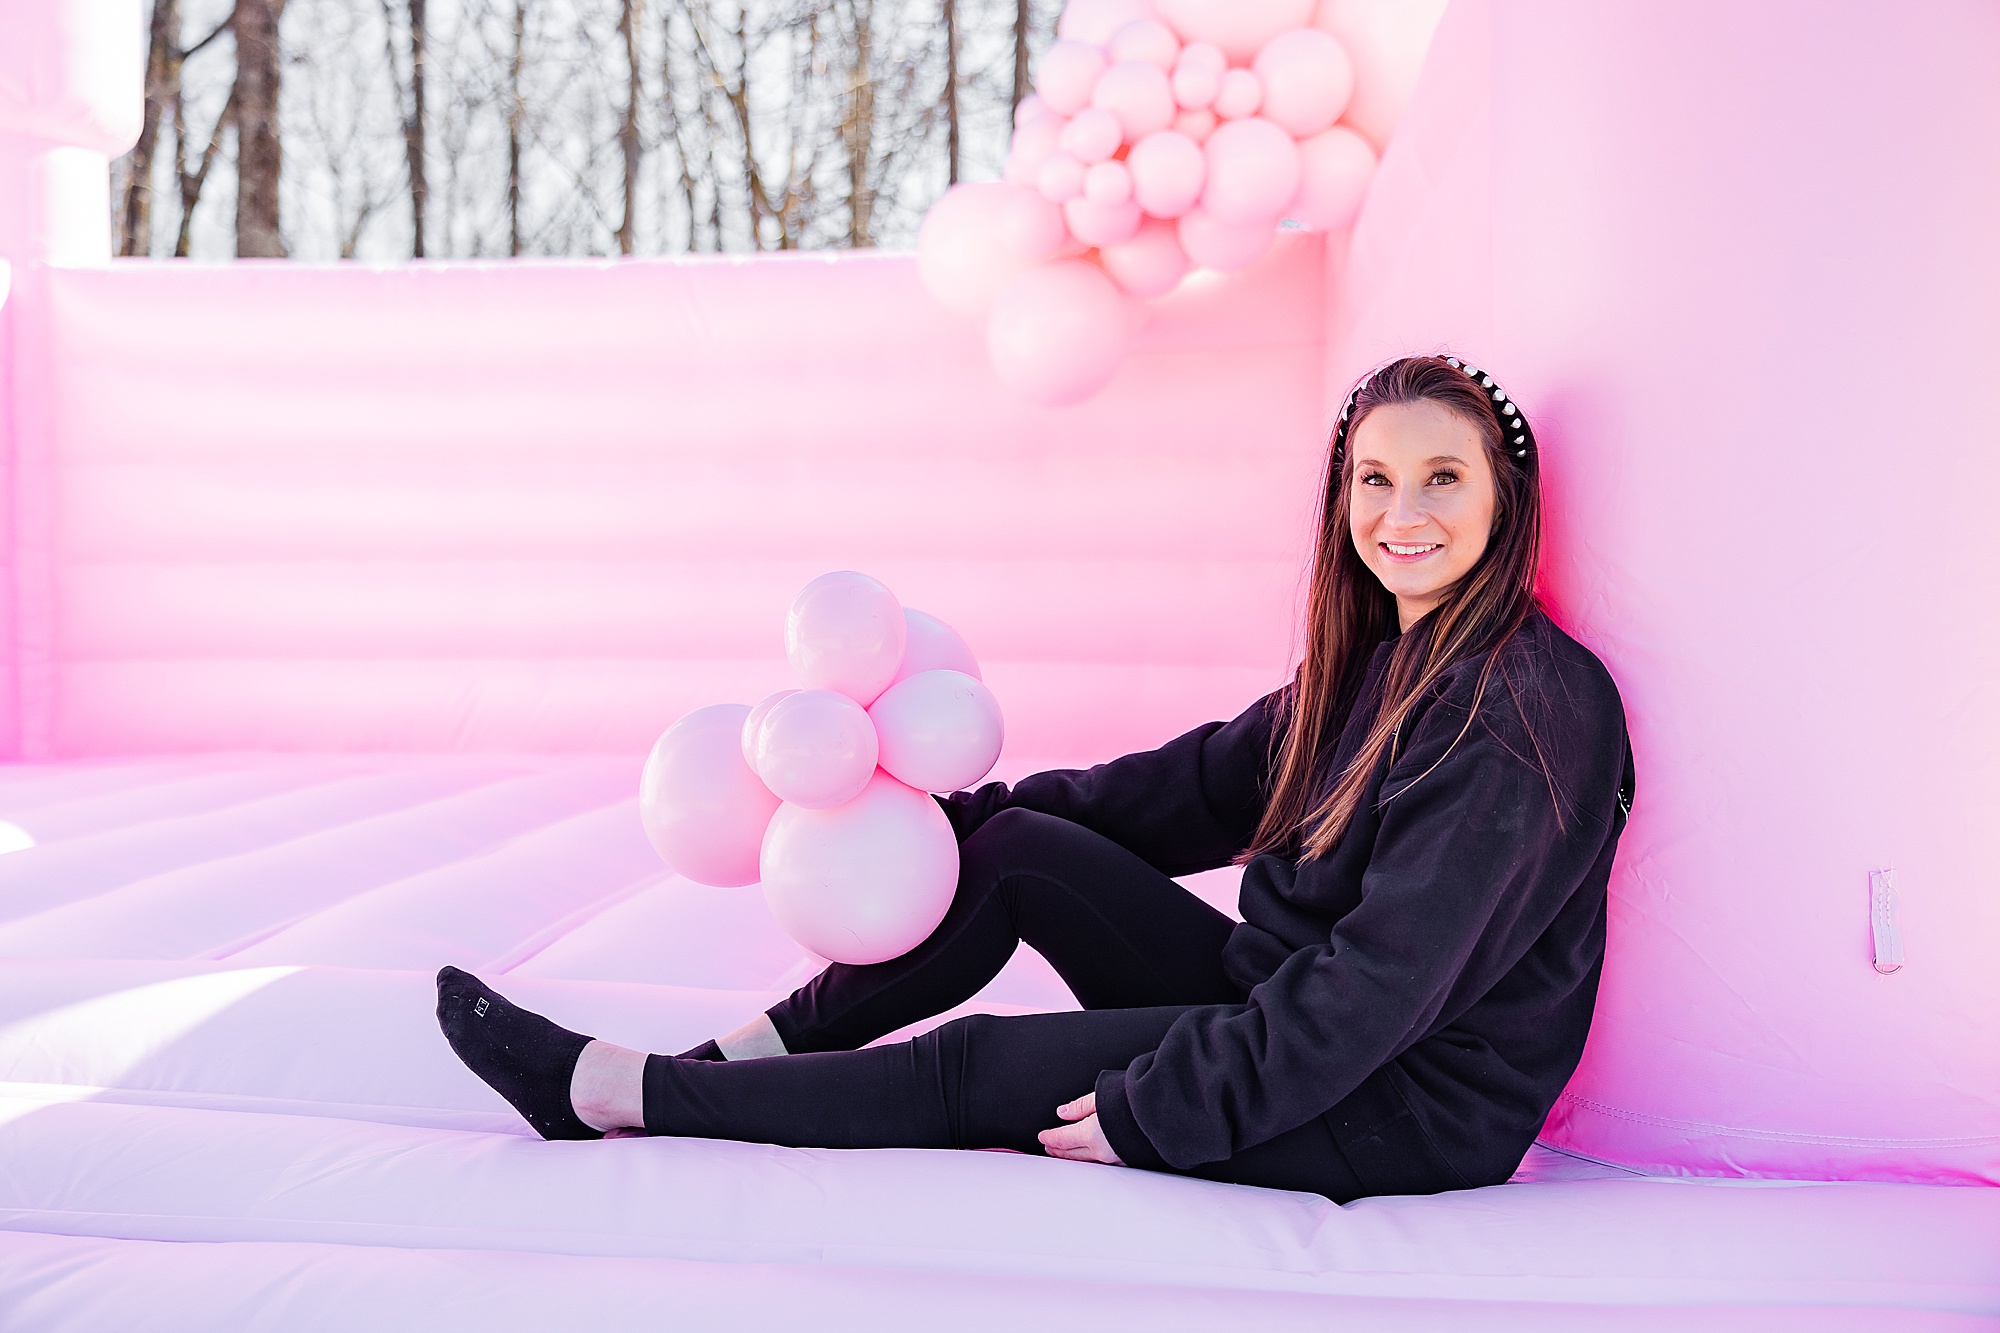 owner of the White Bounce House sits on pink bounce house